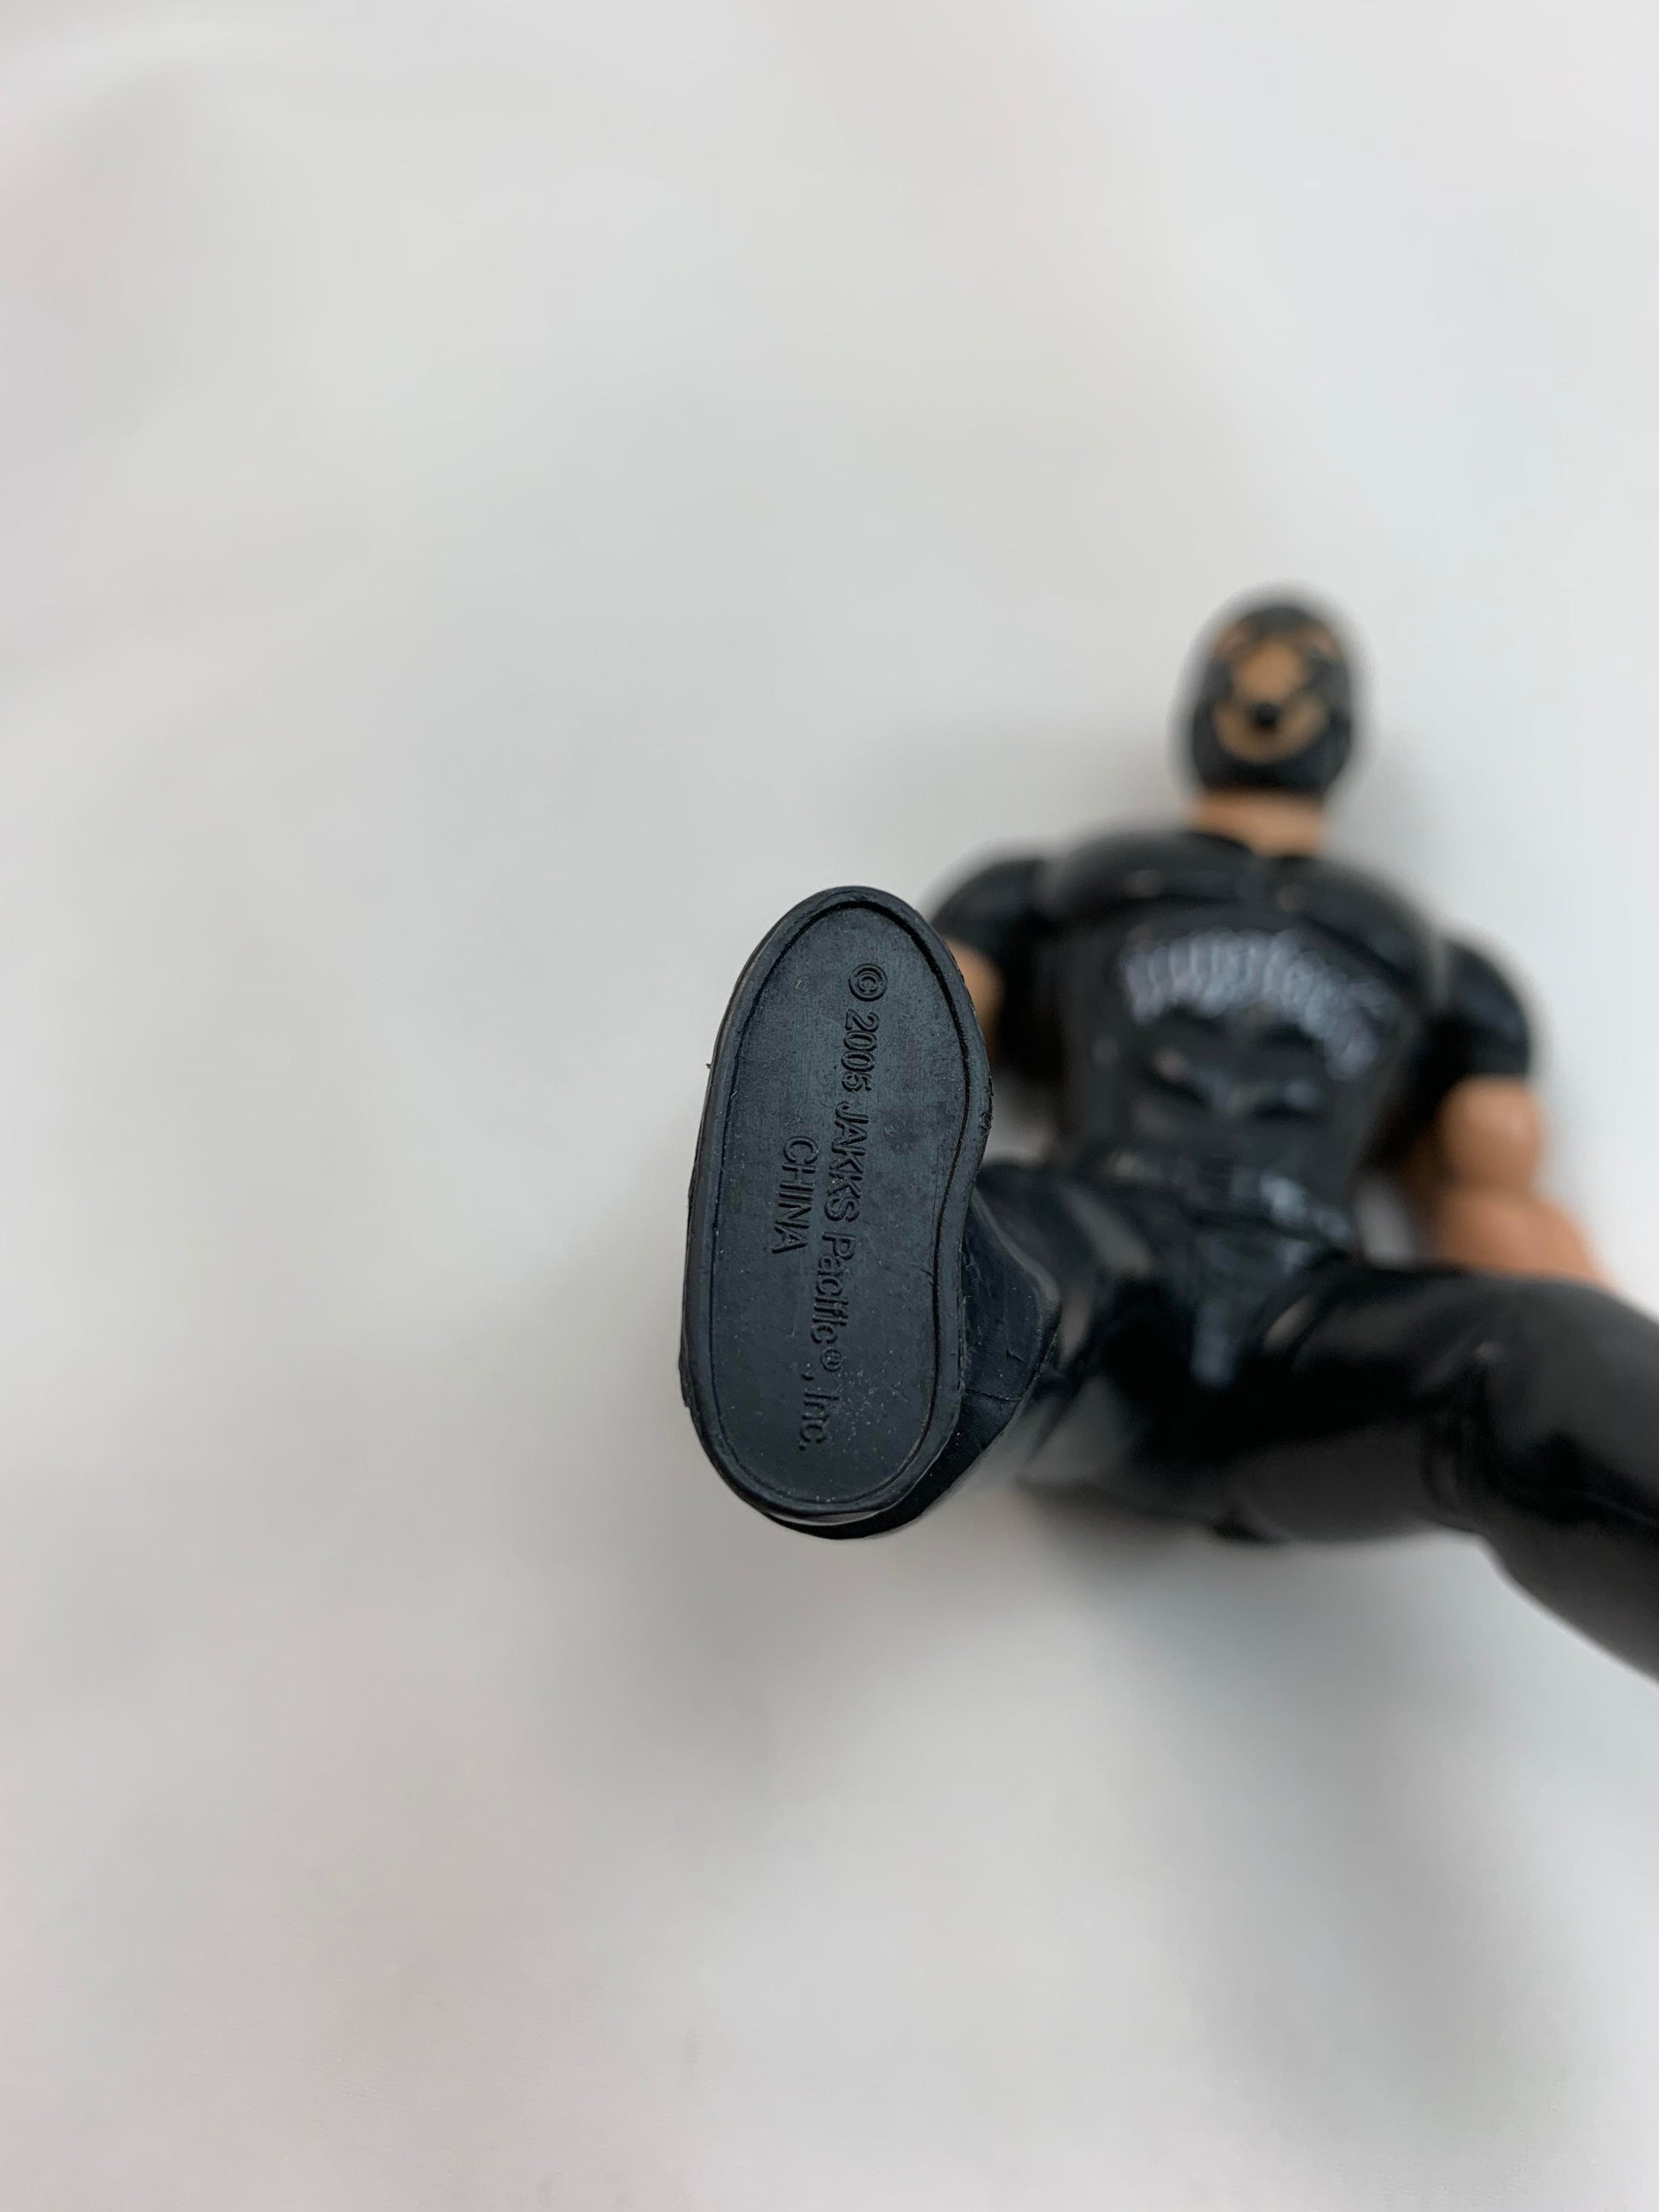 Jakks Pacific 2005 Rey Mysterio Black Outfit Very Rare, Great Condition - Loose Action Figure